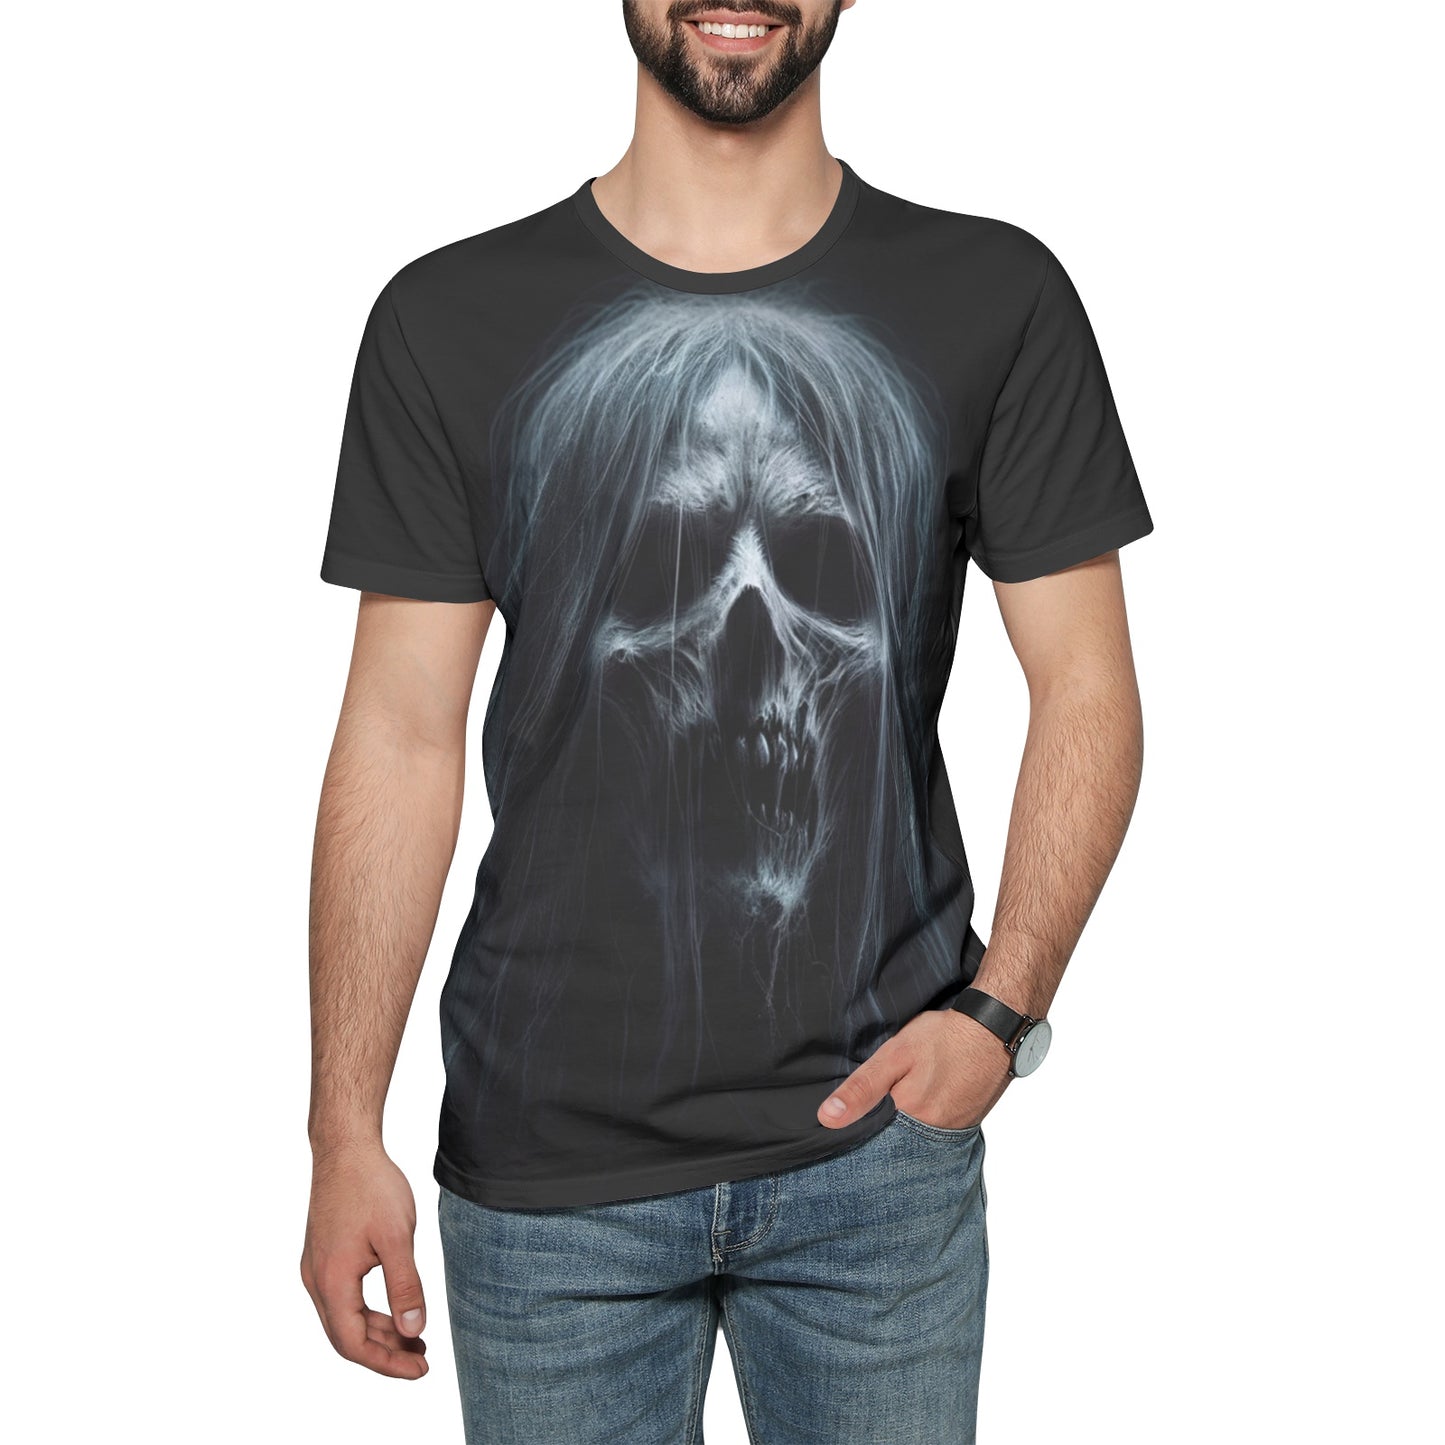 Spectral Revenant Tee - Unisex Cotton T-Shirt with Ghostly Print